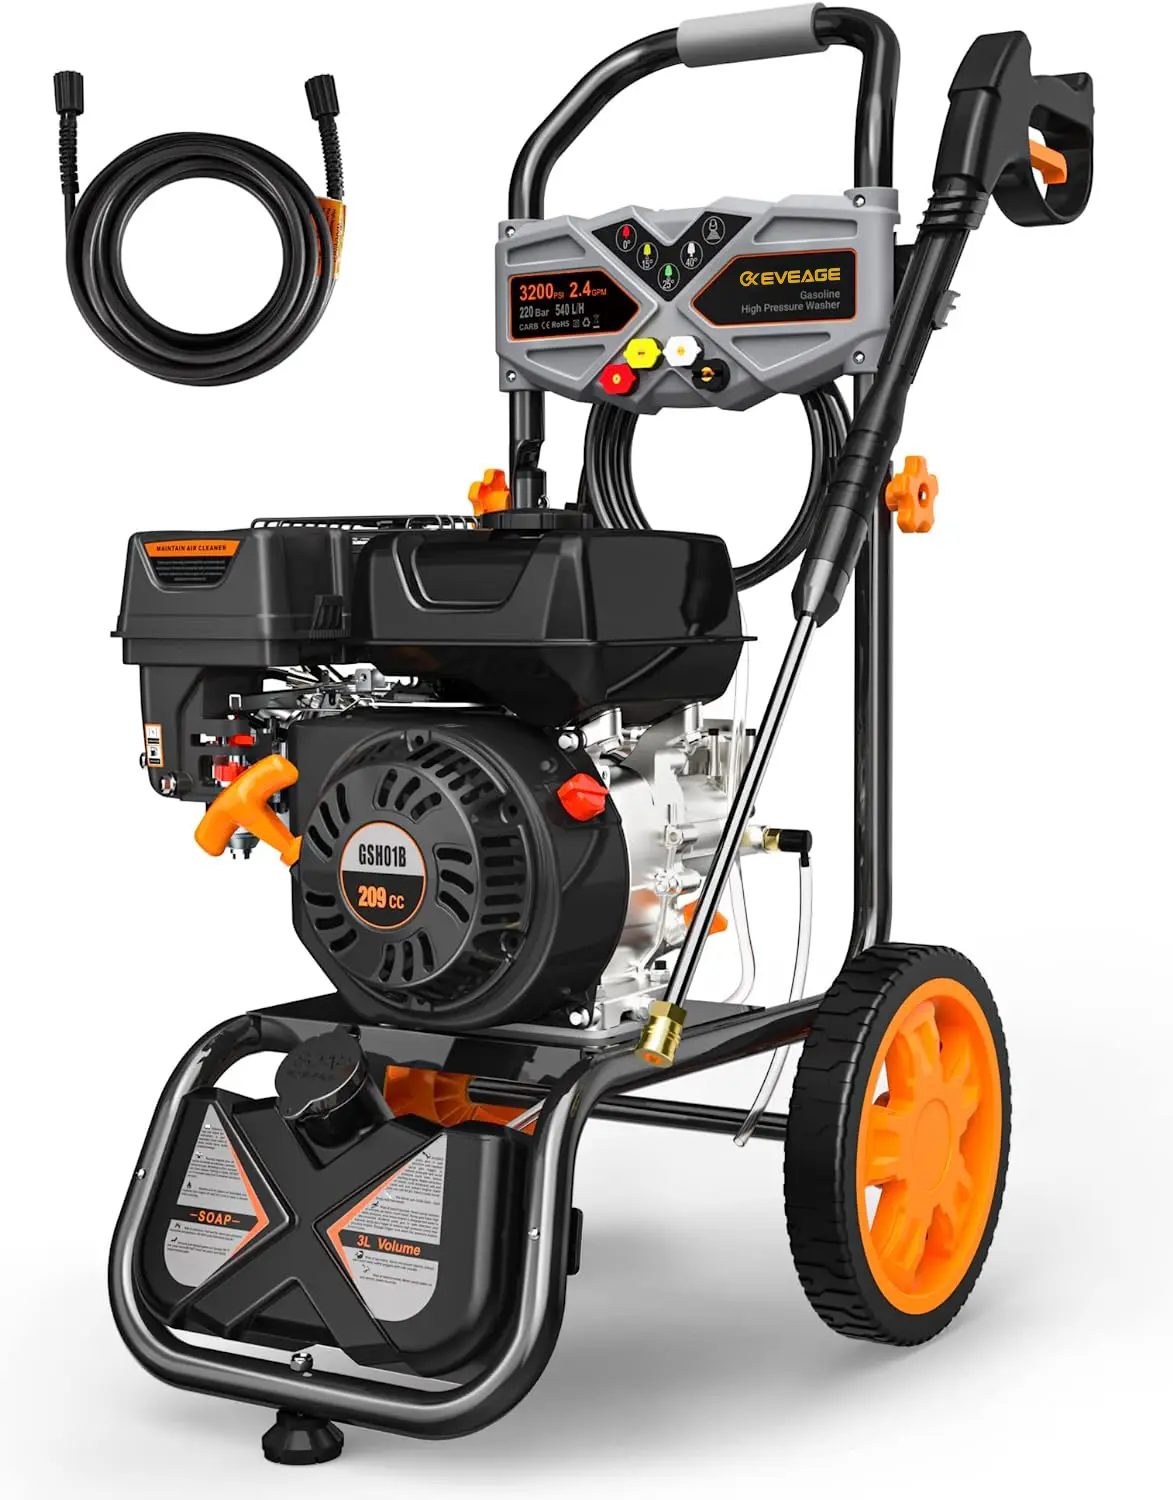 EVEAGE 3200PSI Gas Pressure Washer 6.5HP 2.4GPM with Hose, Wand, and Spray Nozzles